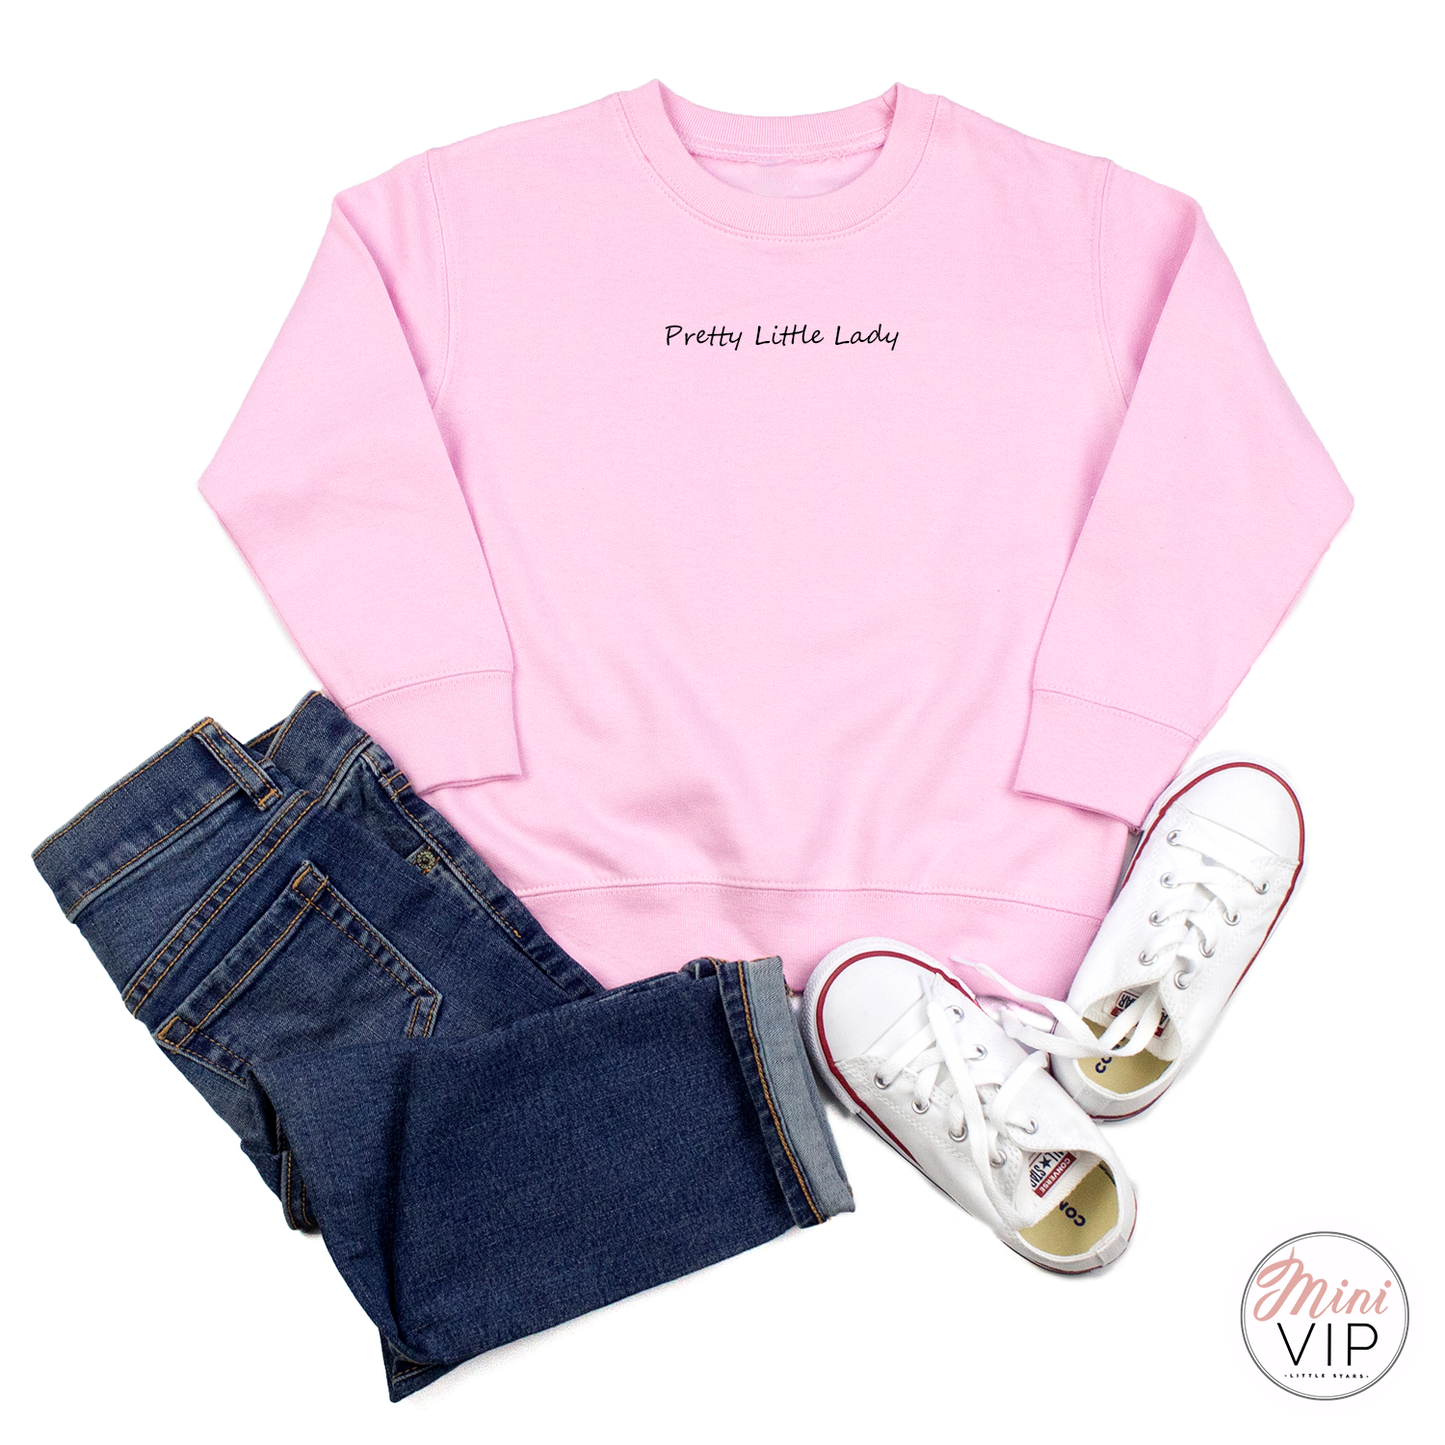 Pretty Little Lady embroidered - Baby Pink Sweatshirt